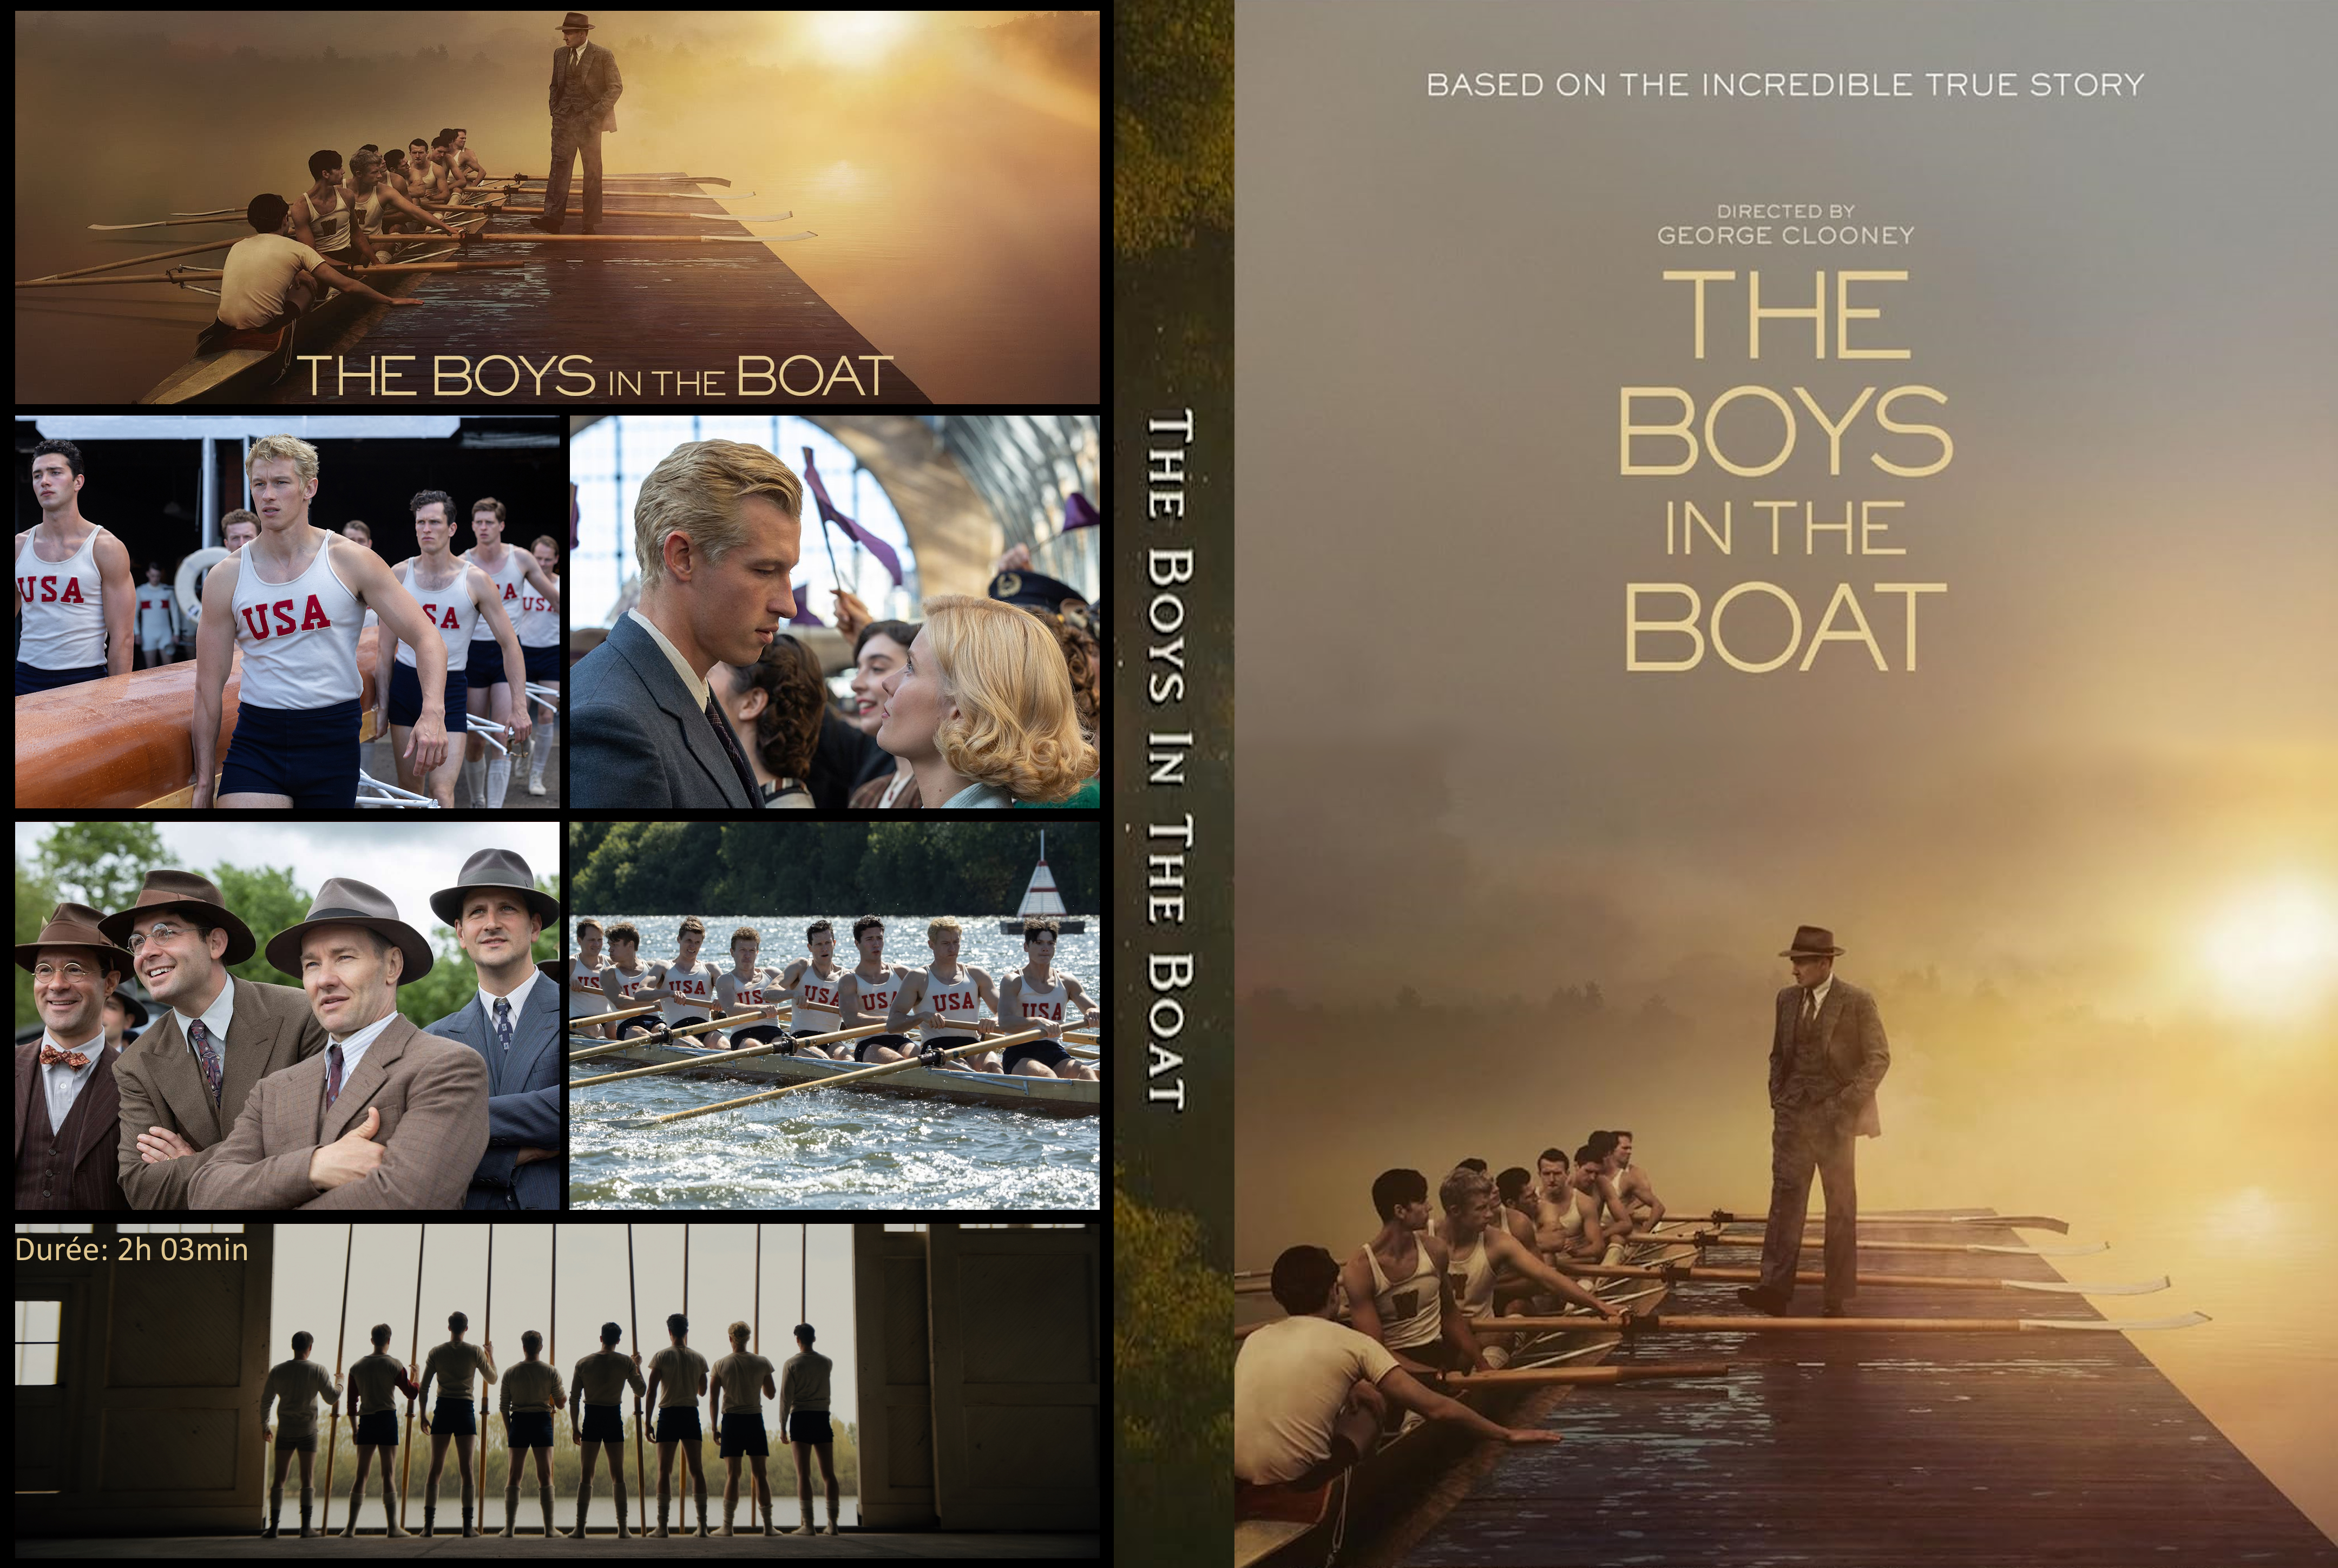 Jaquette DVD The Boys in the Boat custom